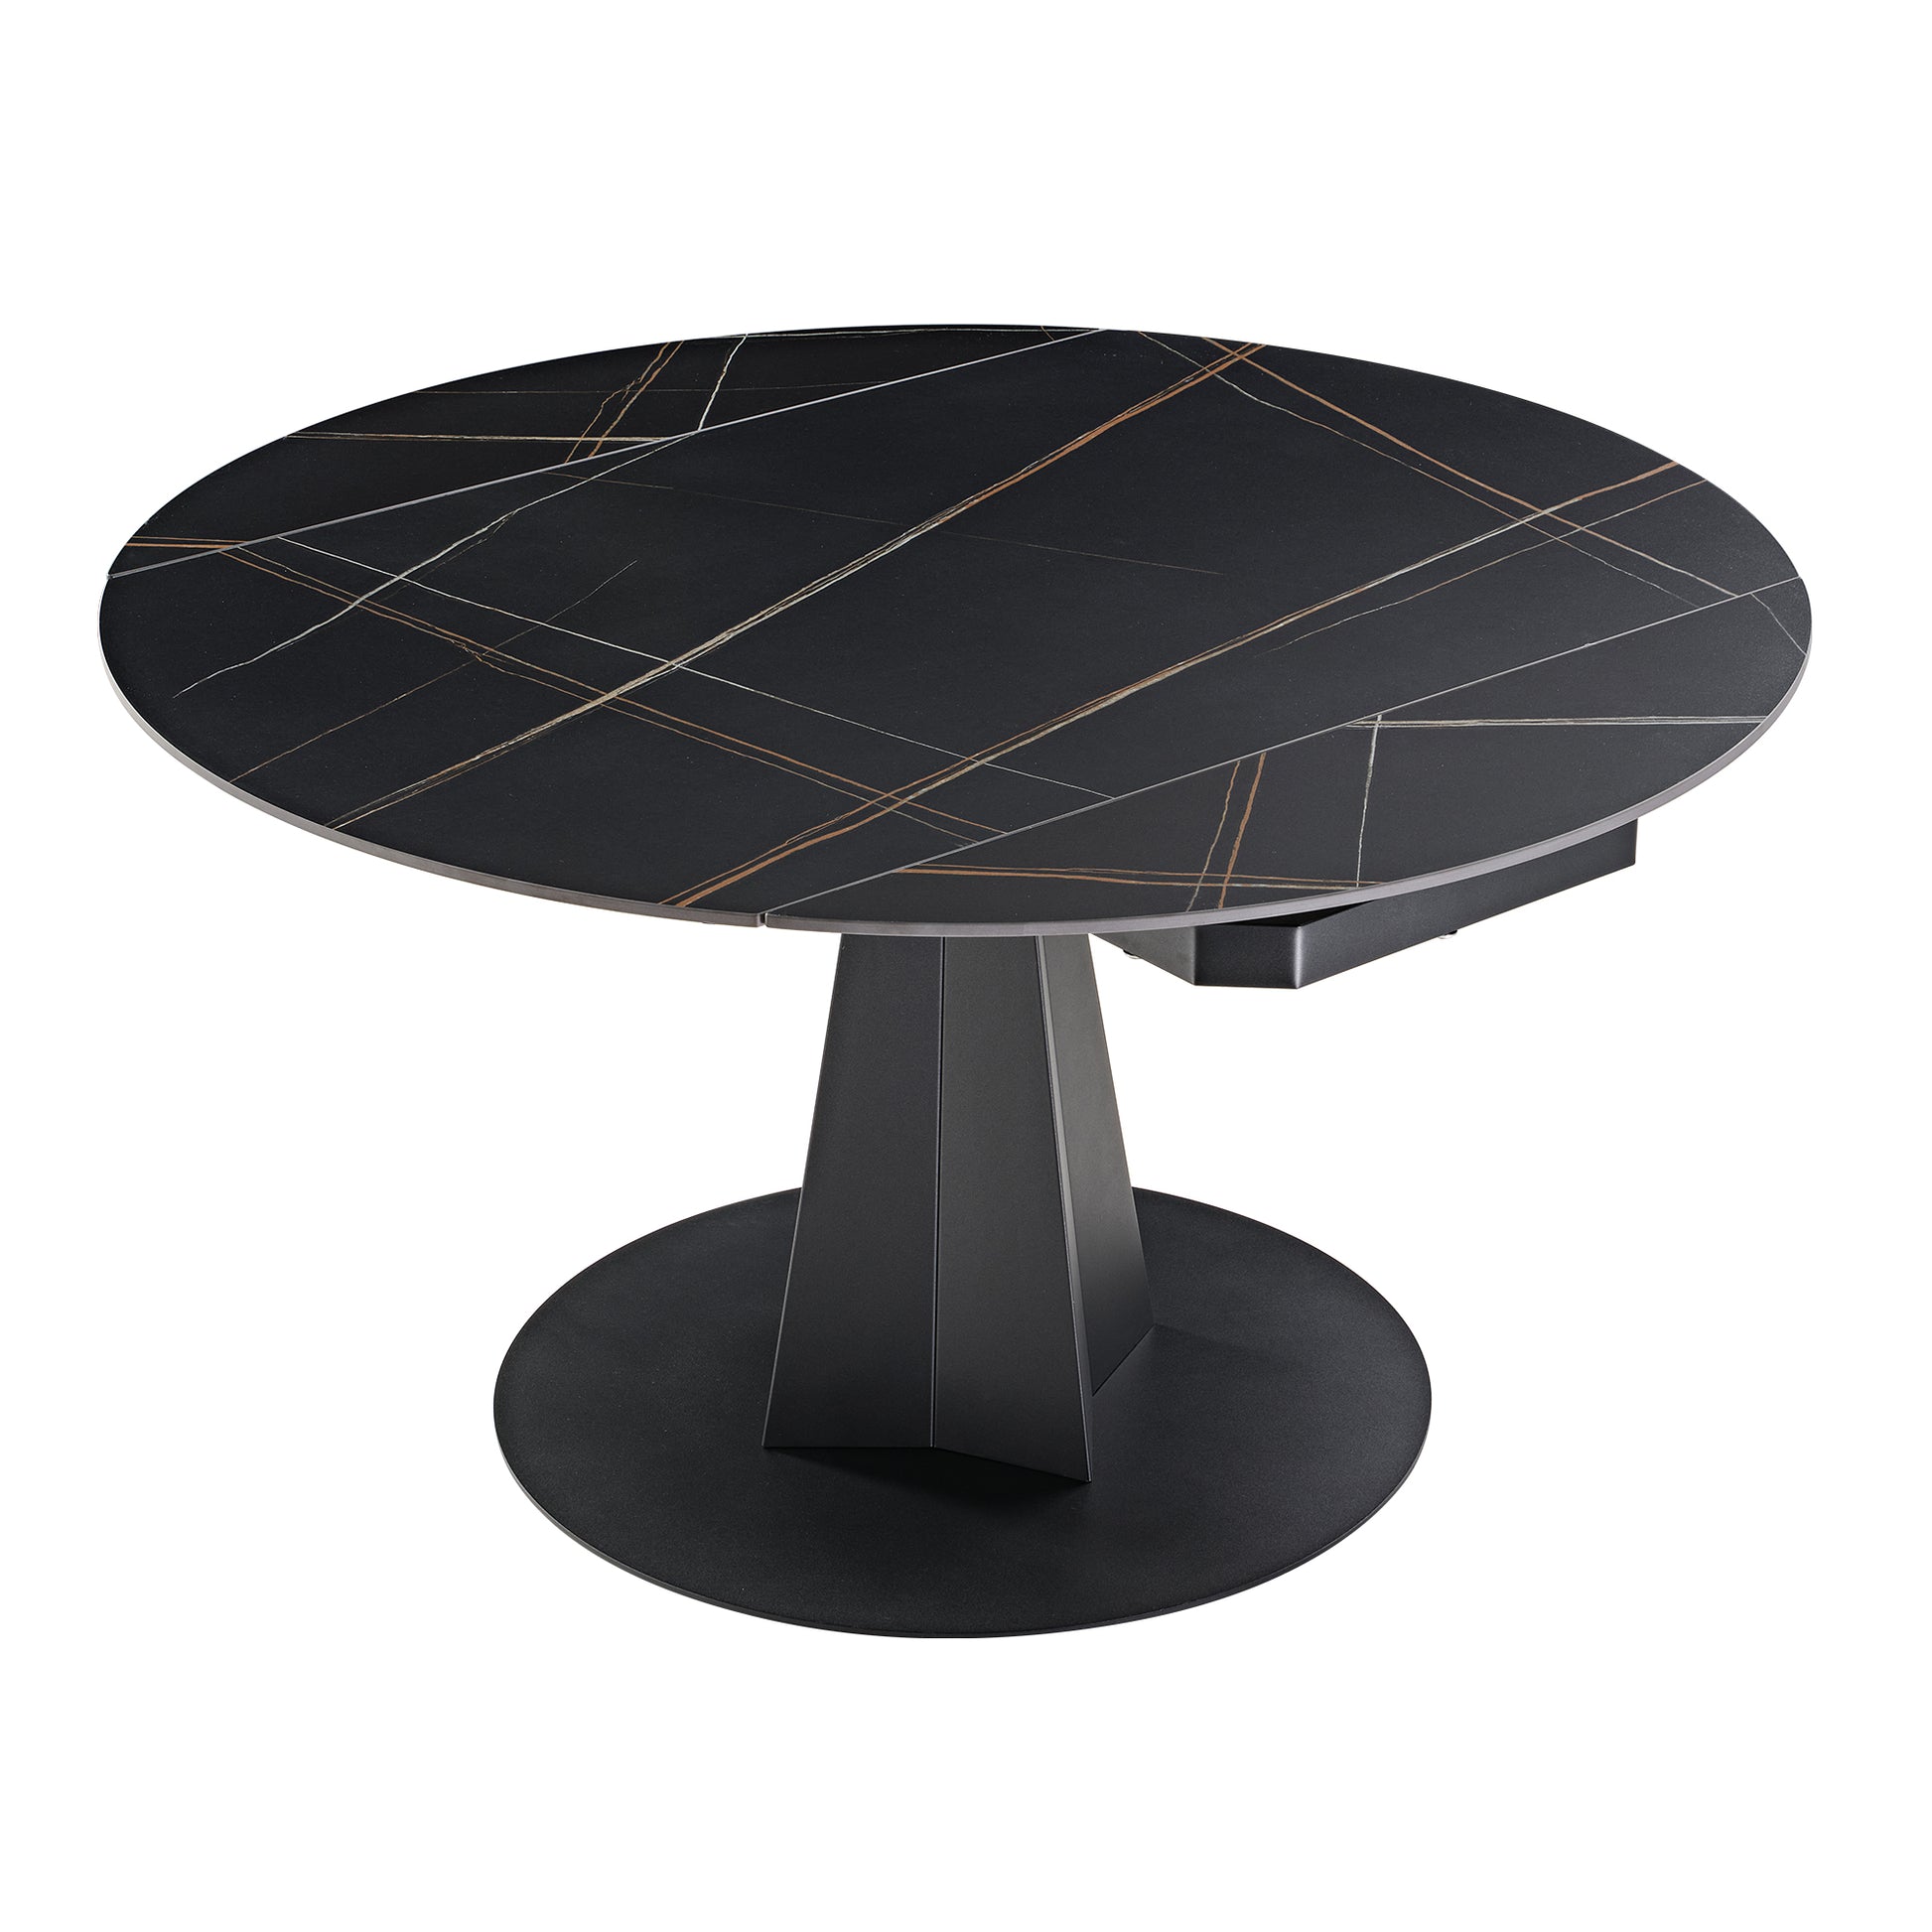 53 inch Round Extending Dining Table with Black Base, product image